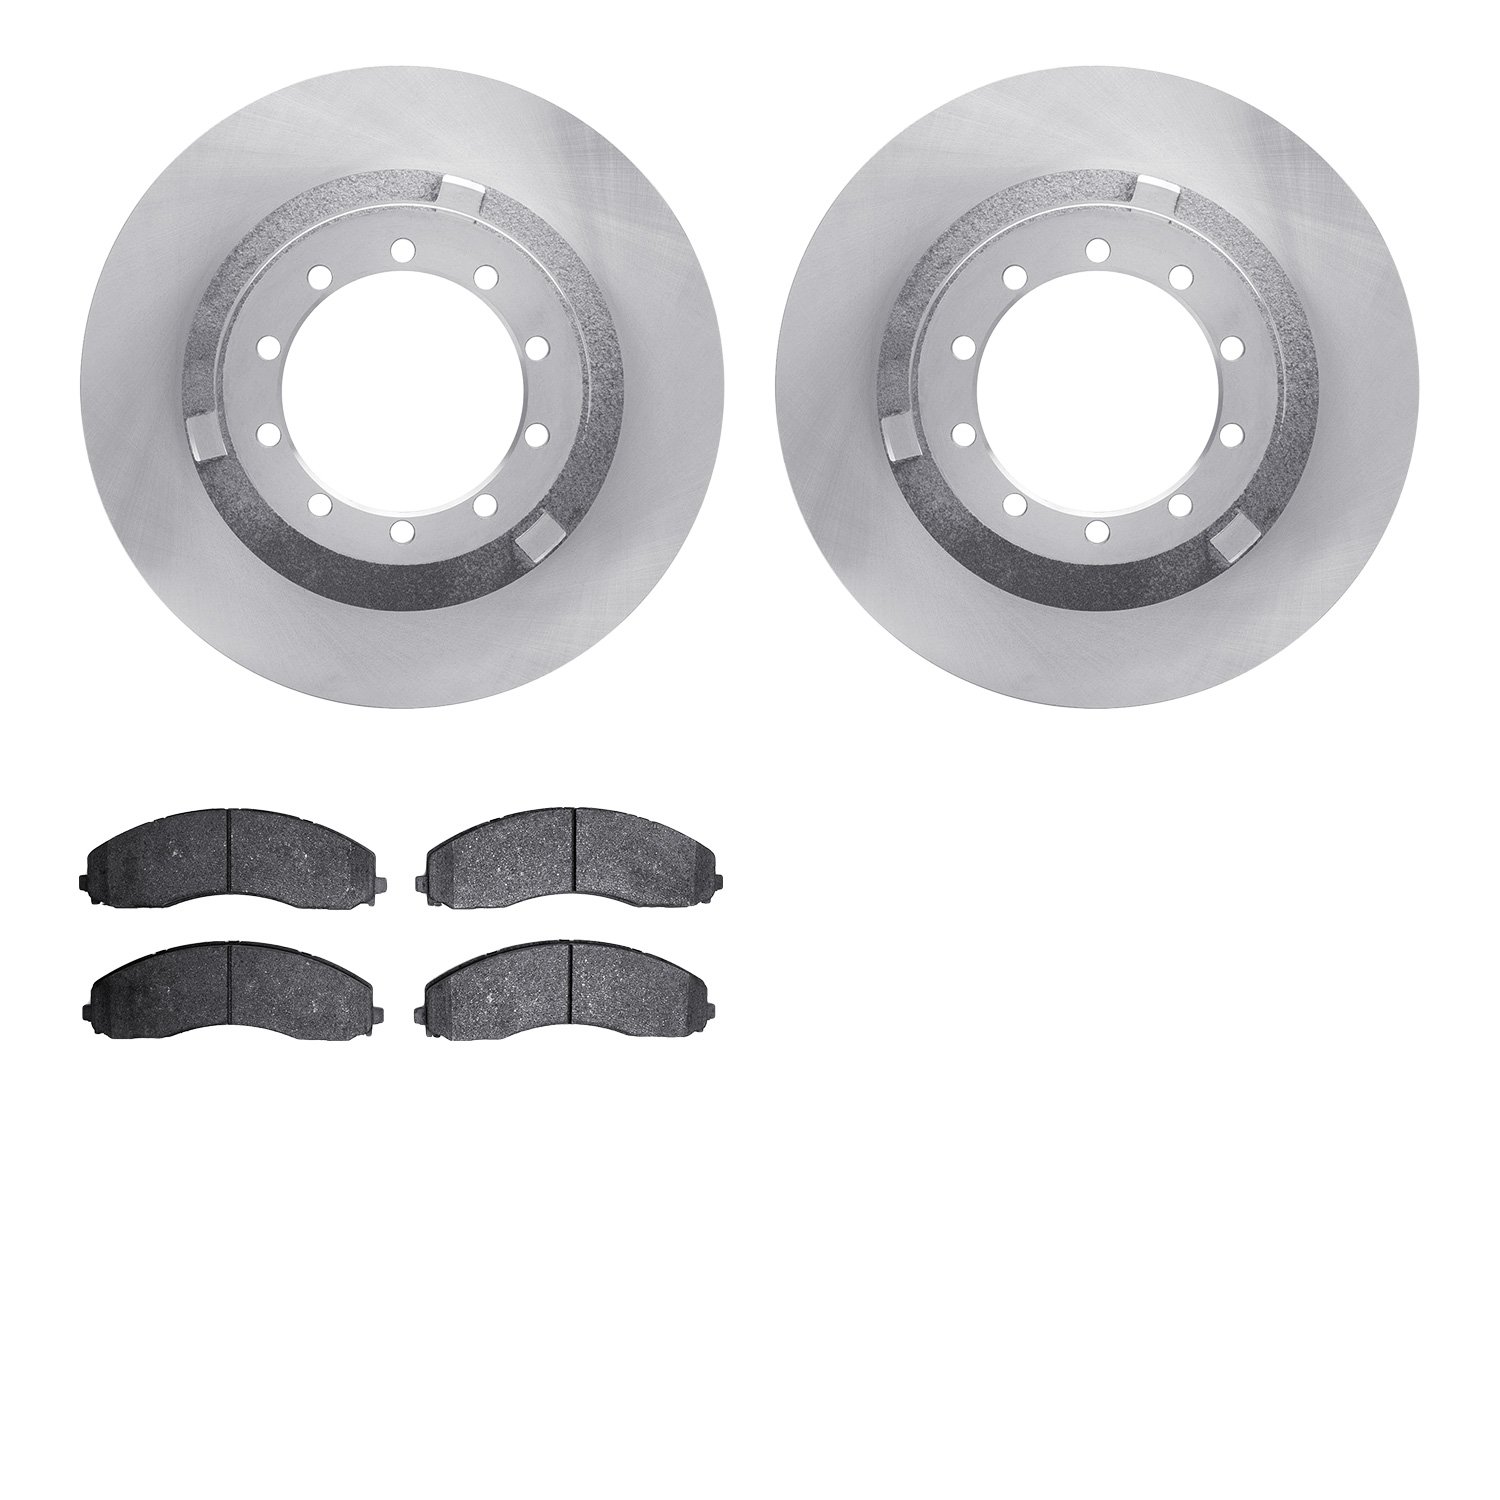 6402-54329 Brake Rotors with Ultimate-Duty Brake Pads, Fits Select Ford/Lincoln/Mercury/Mazda, Position: Rear